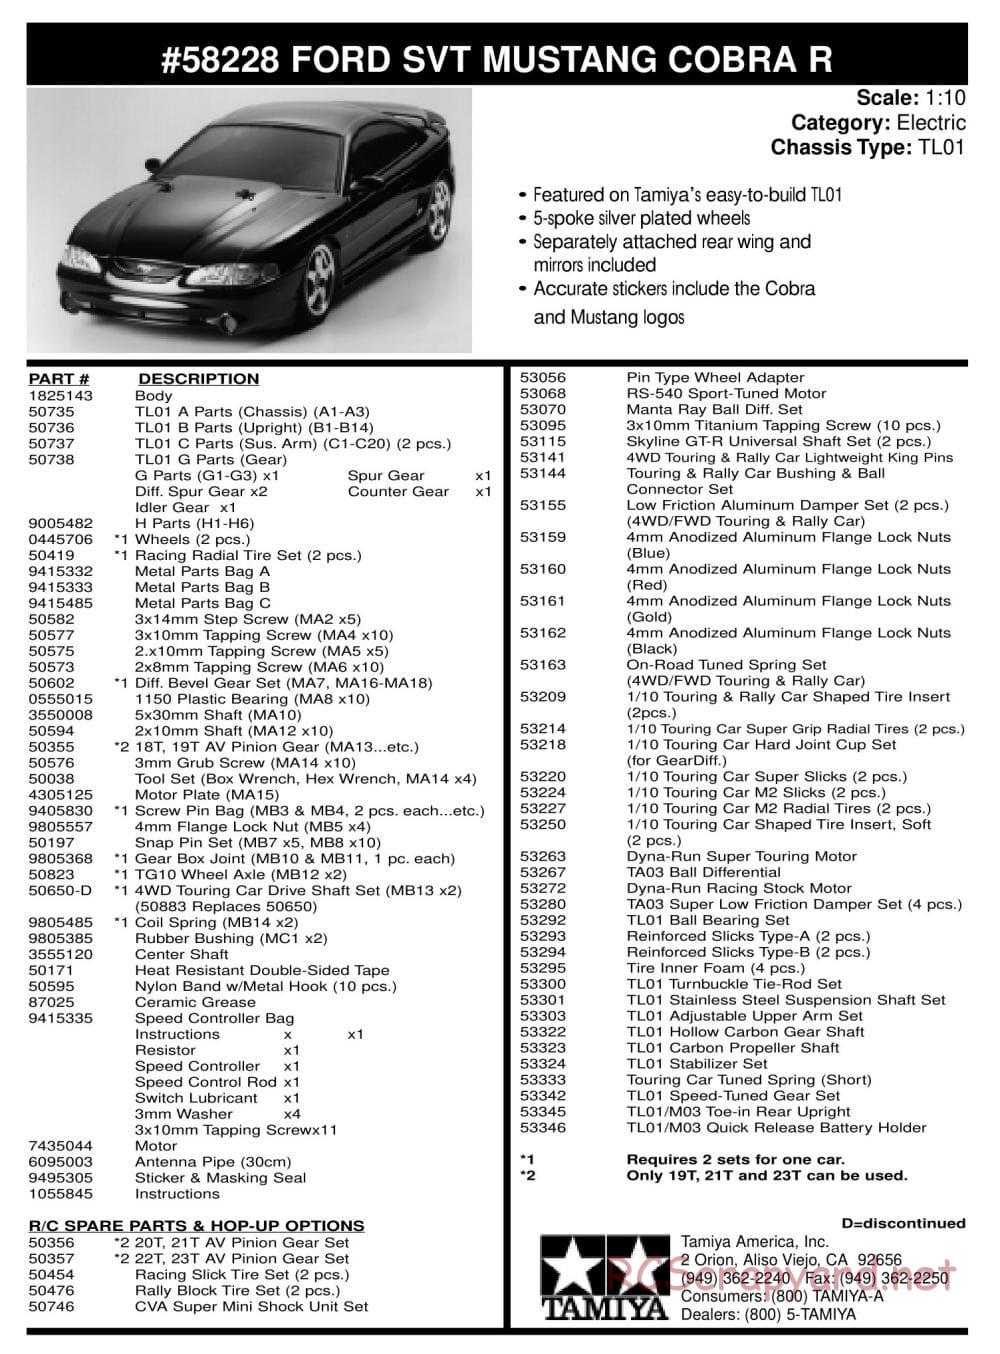 Tamiya - Ford SVT Mustang Cobra-R - TL-01 Chassis - Parts List - Page 1